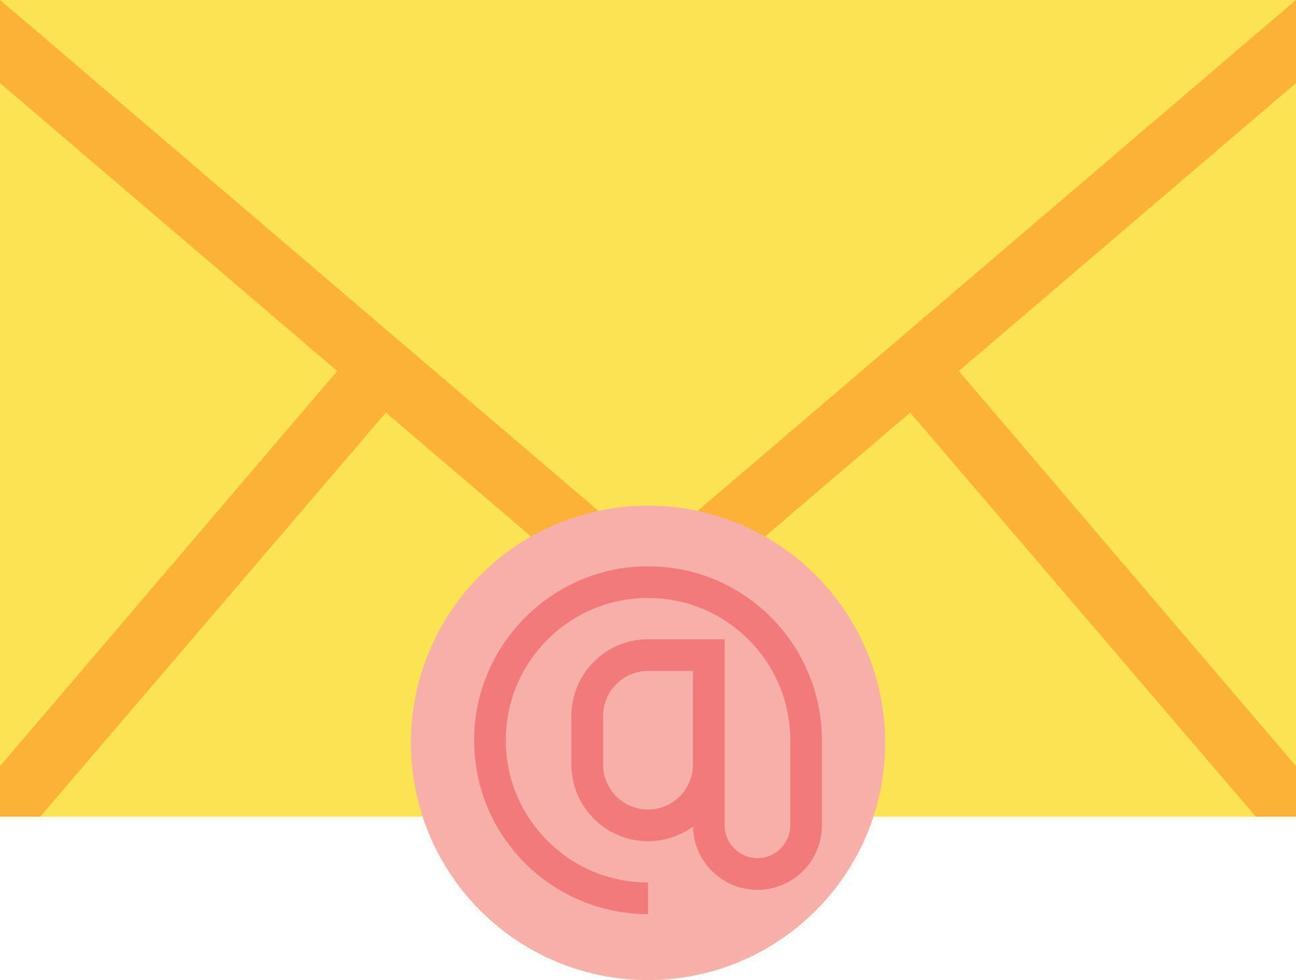 Email Icon vector illustration